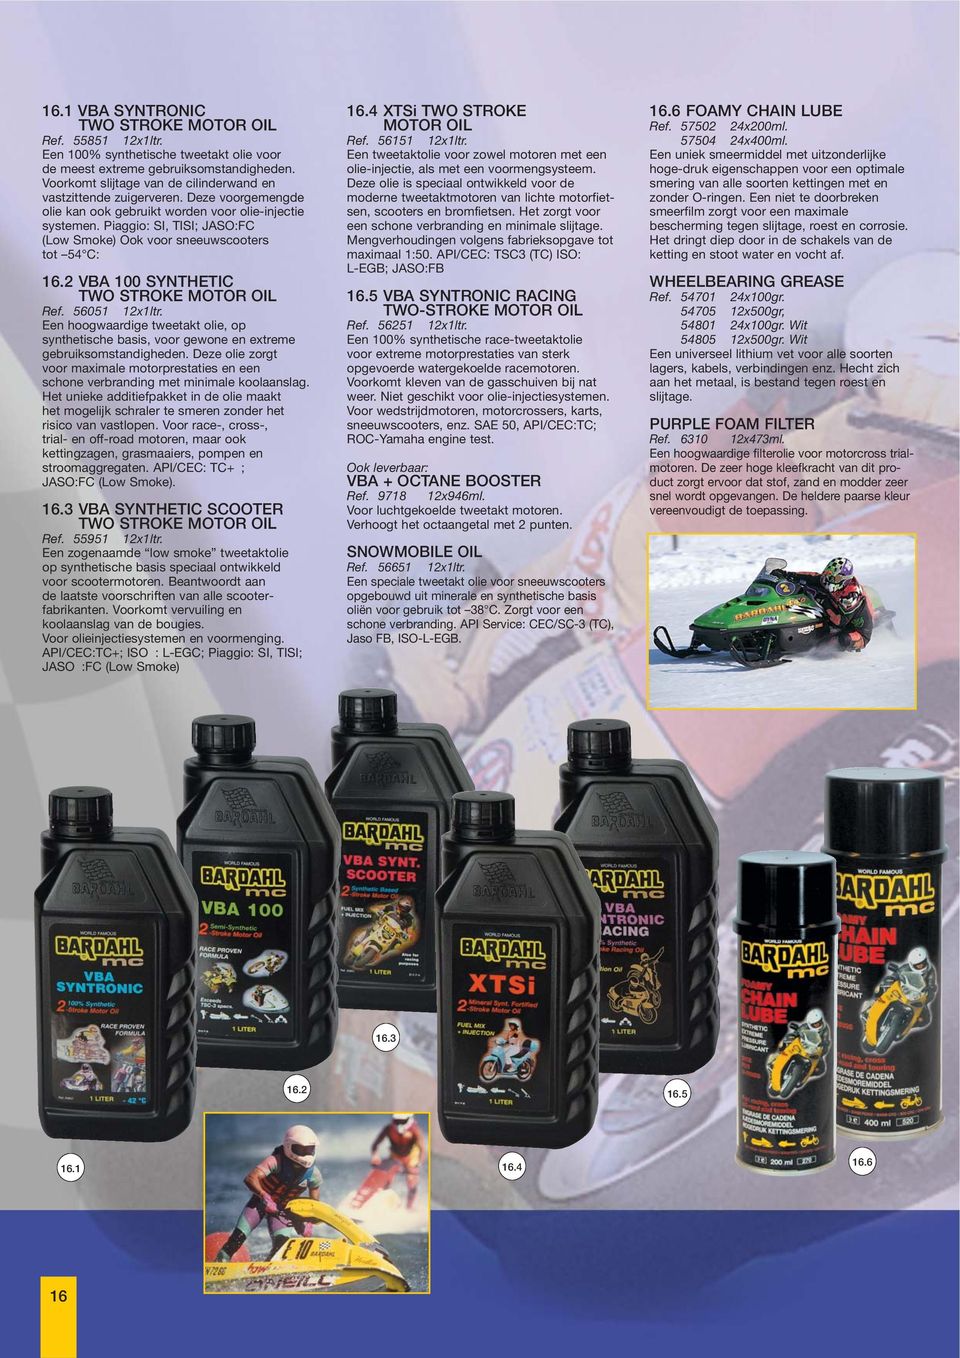 Piaggio: SI, TISI; JASO:FC (Low Smoke) Ook voor sneeuwscooters tot 54 C: 16.2 VBA 100 SYNTHETIC TWO STROKE MOTOR OIL Ref. 56051 12x1ltr.